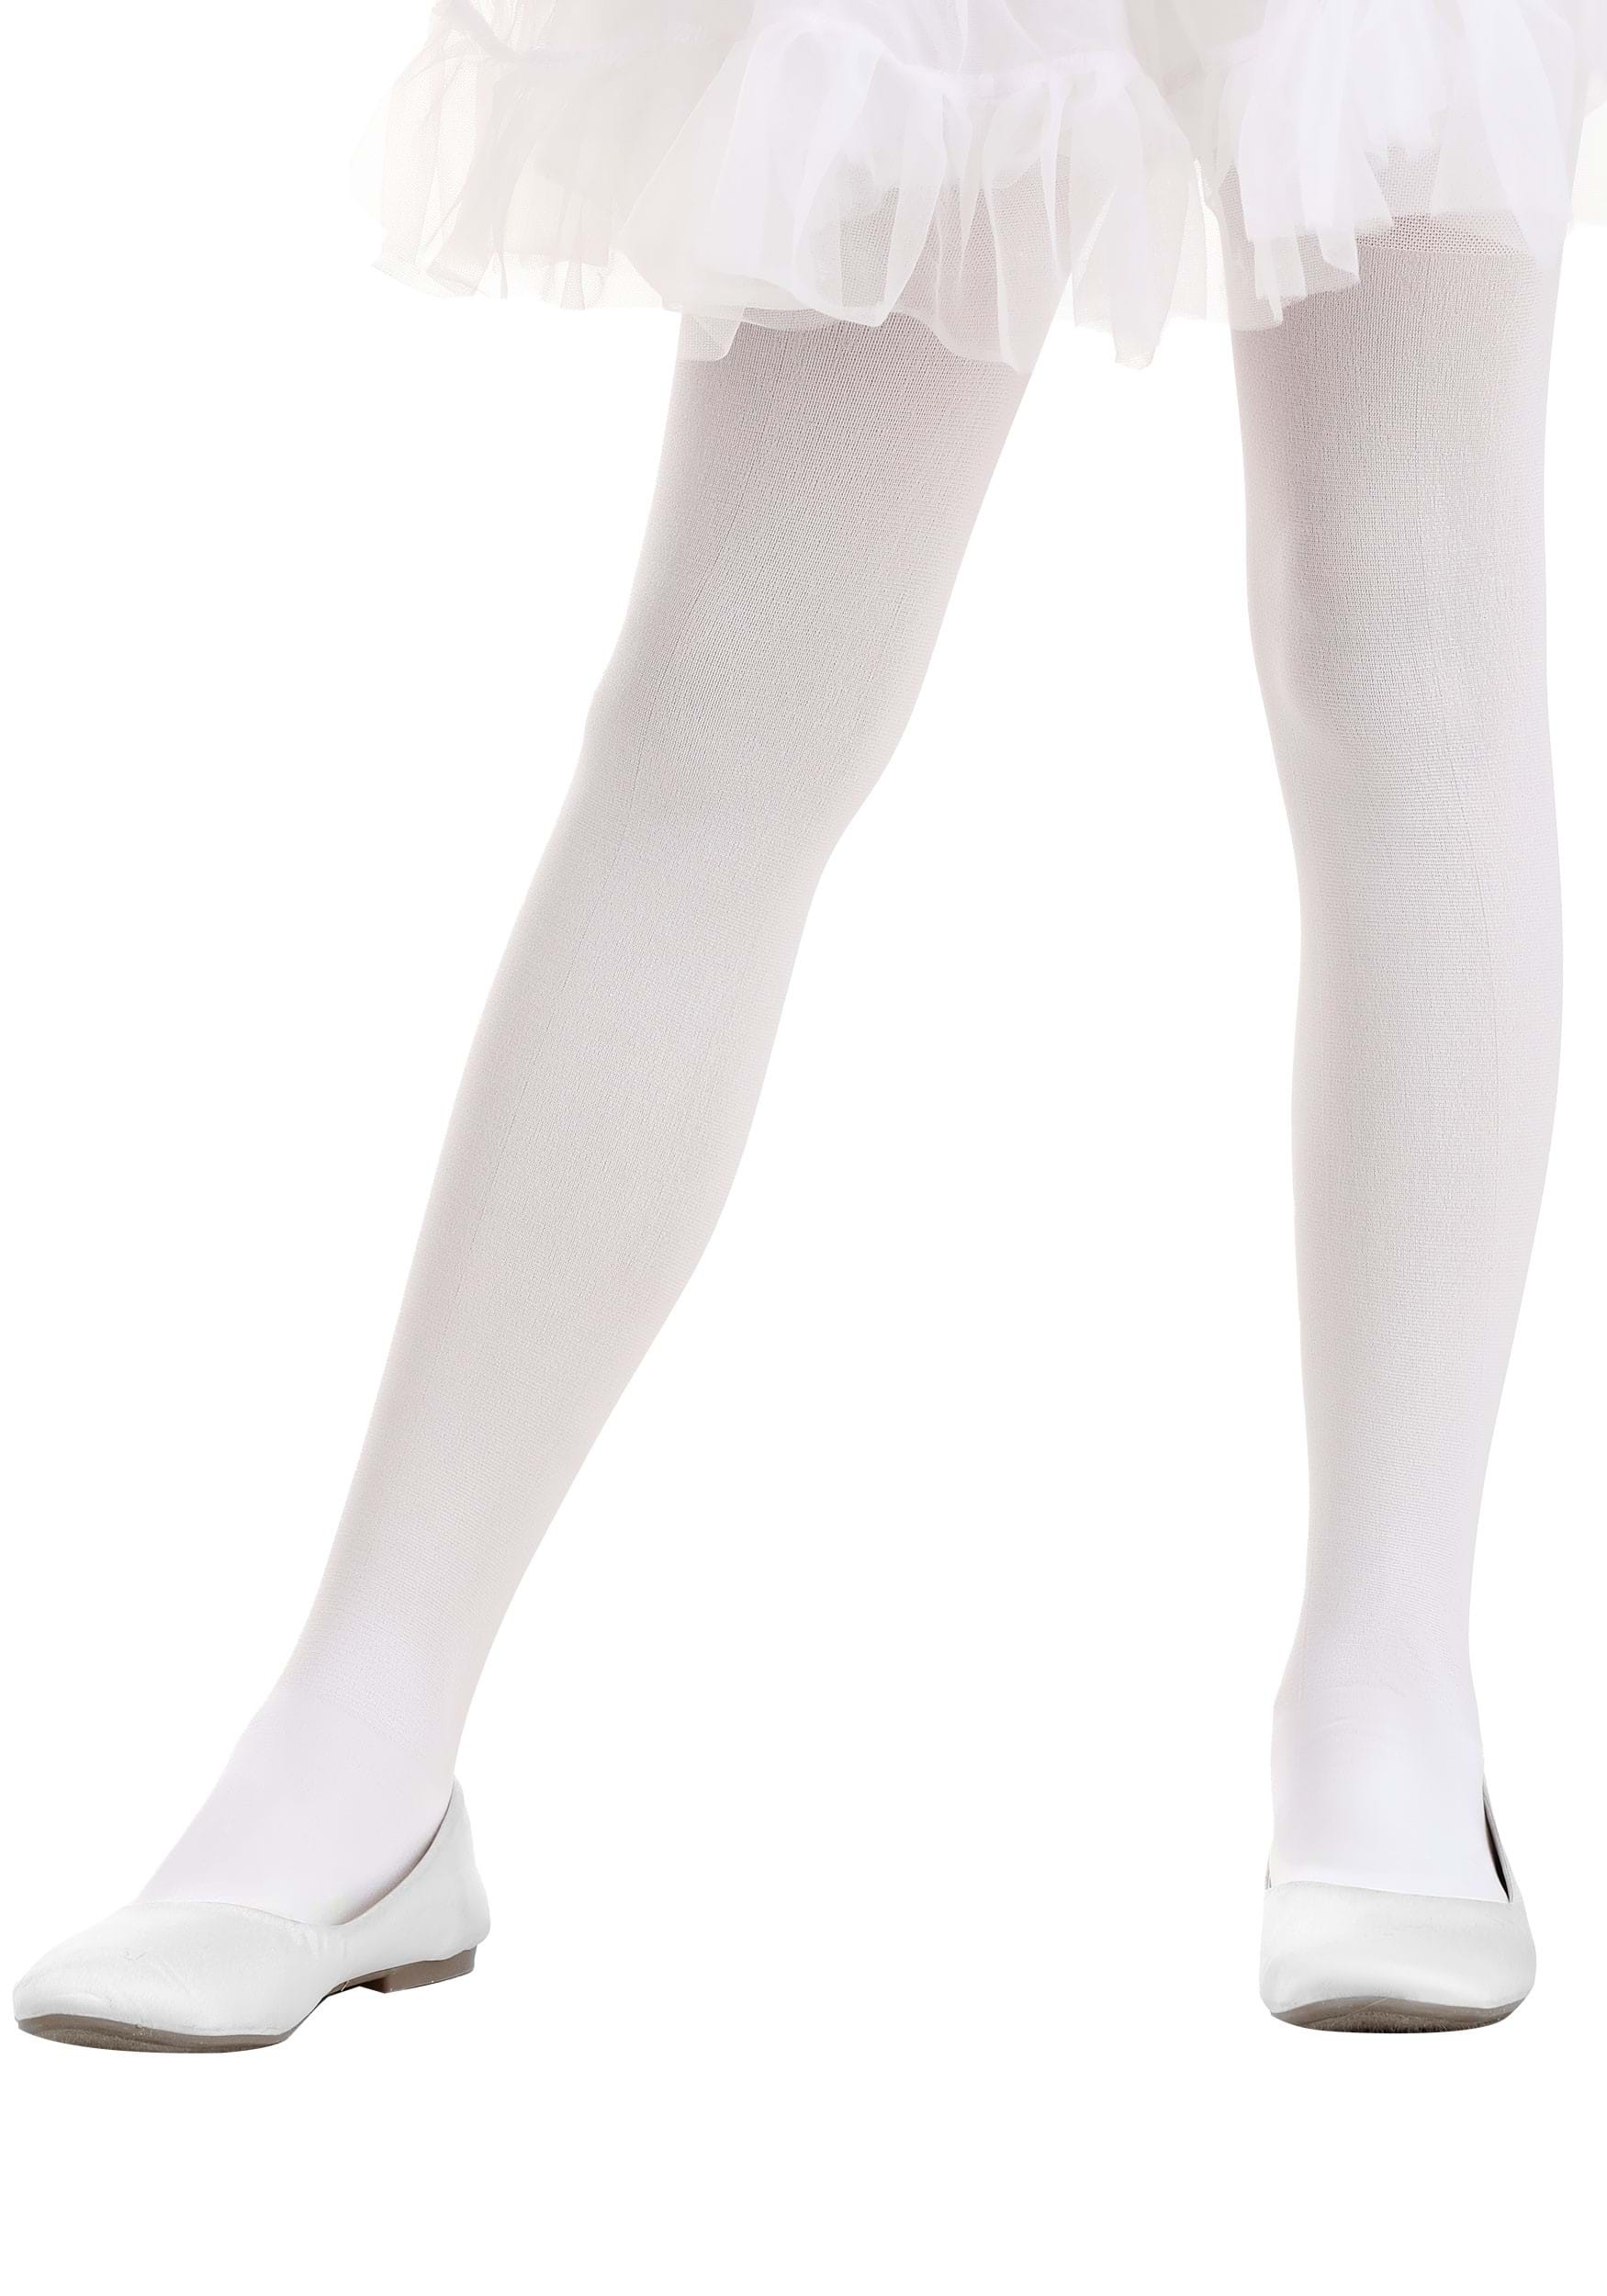 https://images.halloweencostumes.ca/products/89326/1-1/kids-deluxe-white-tights.jpg